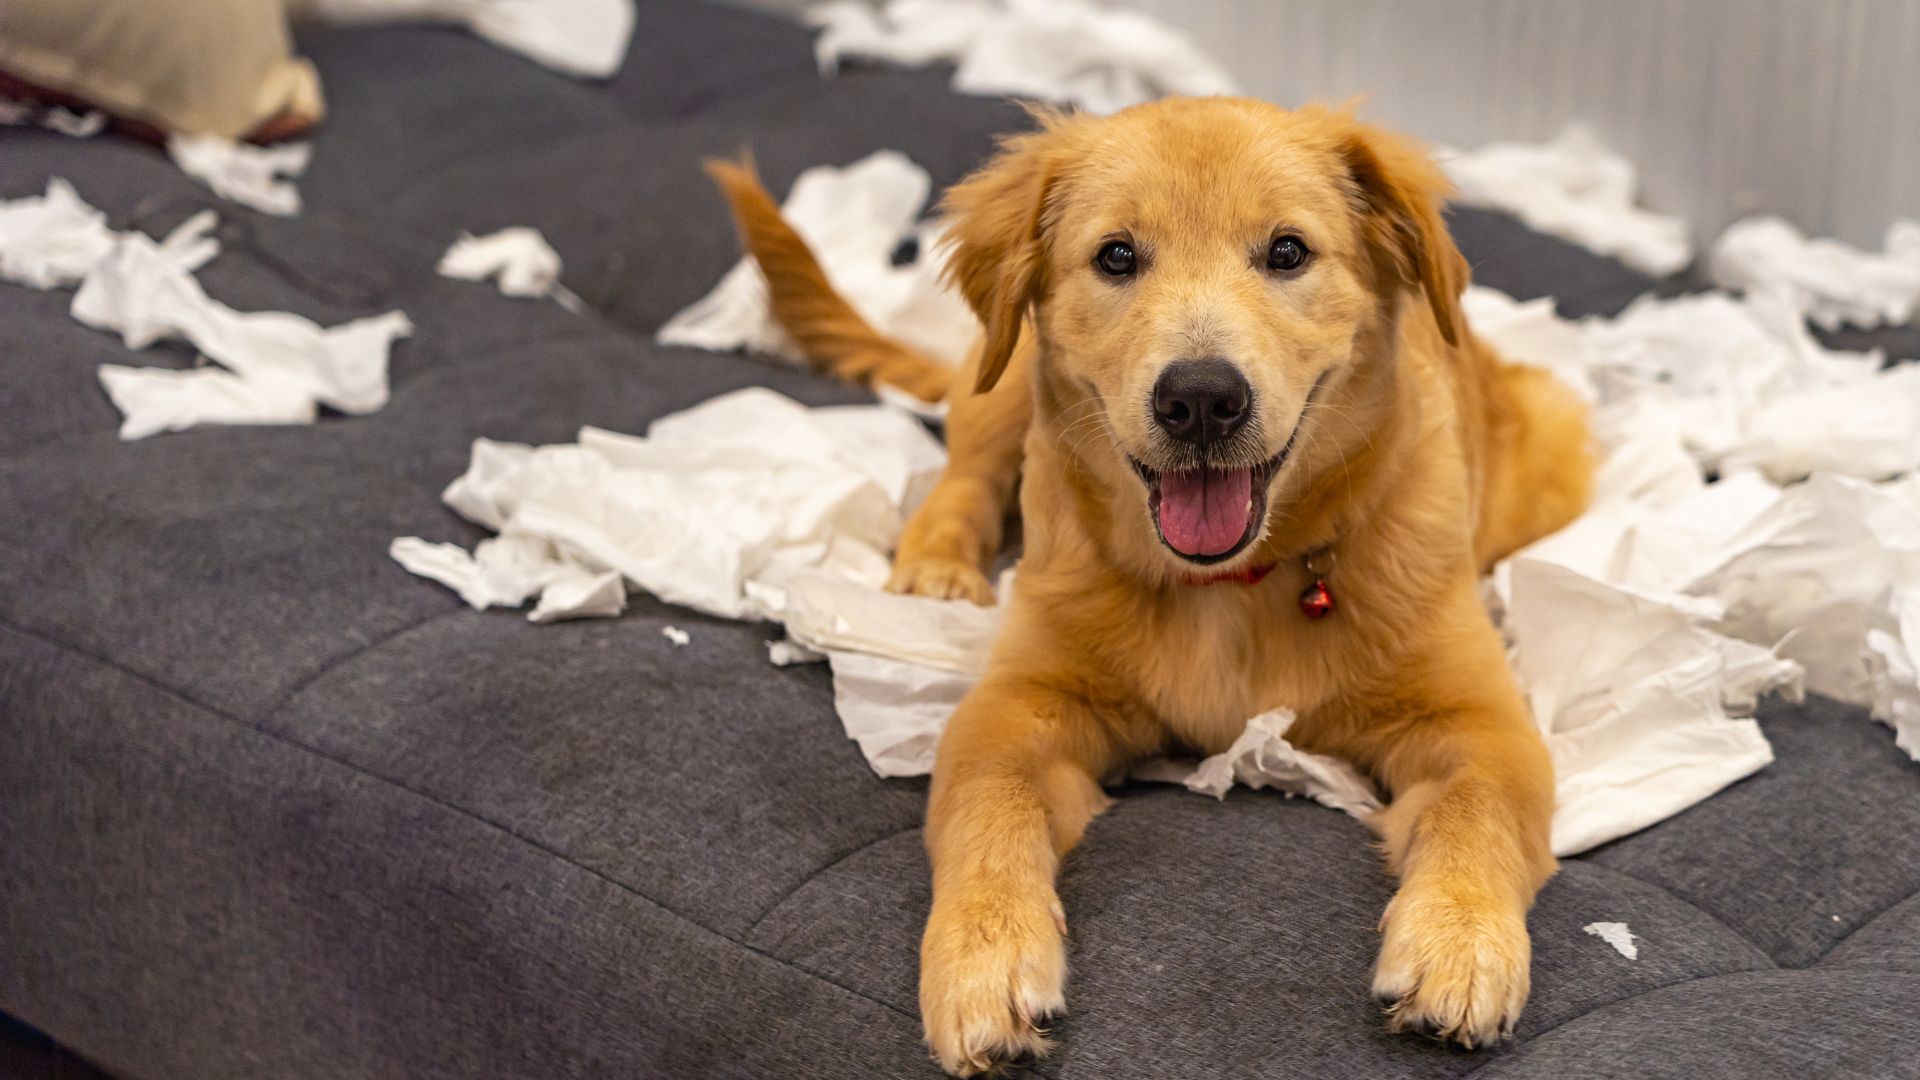 naughty young golden dog playing with toilet papers